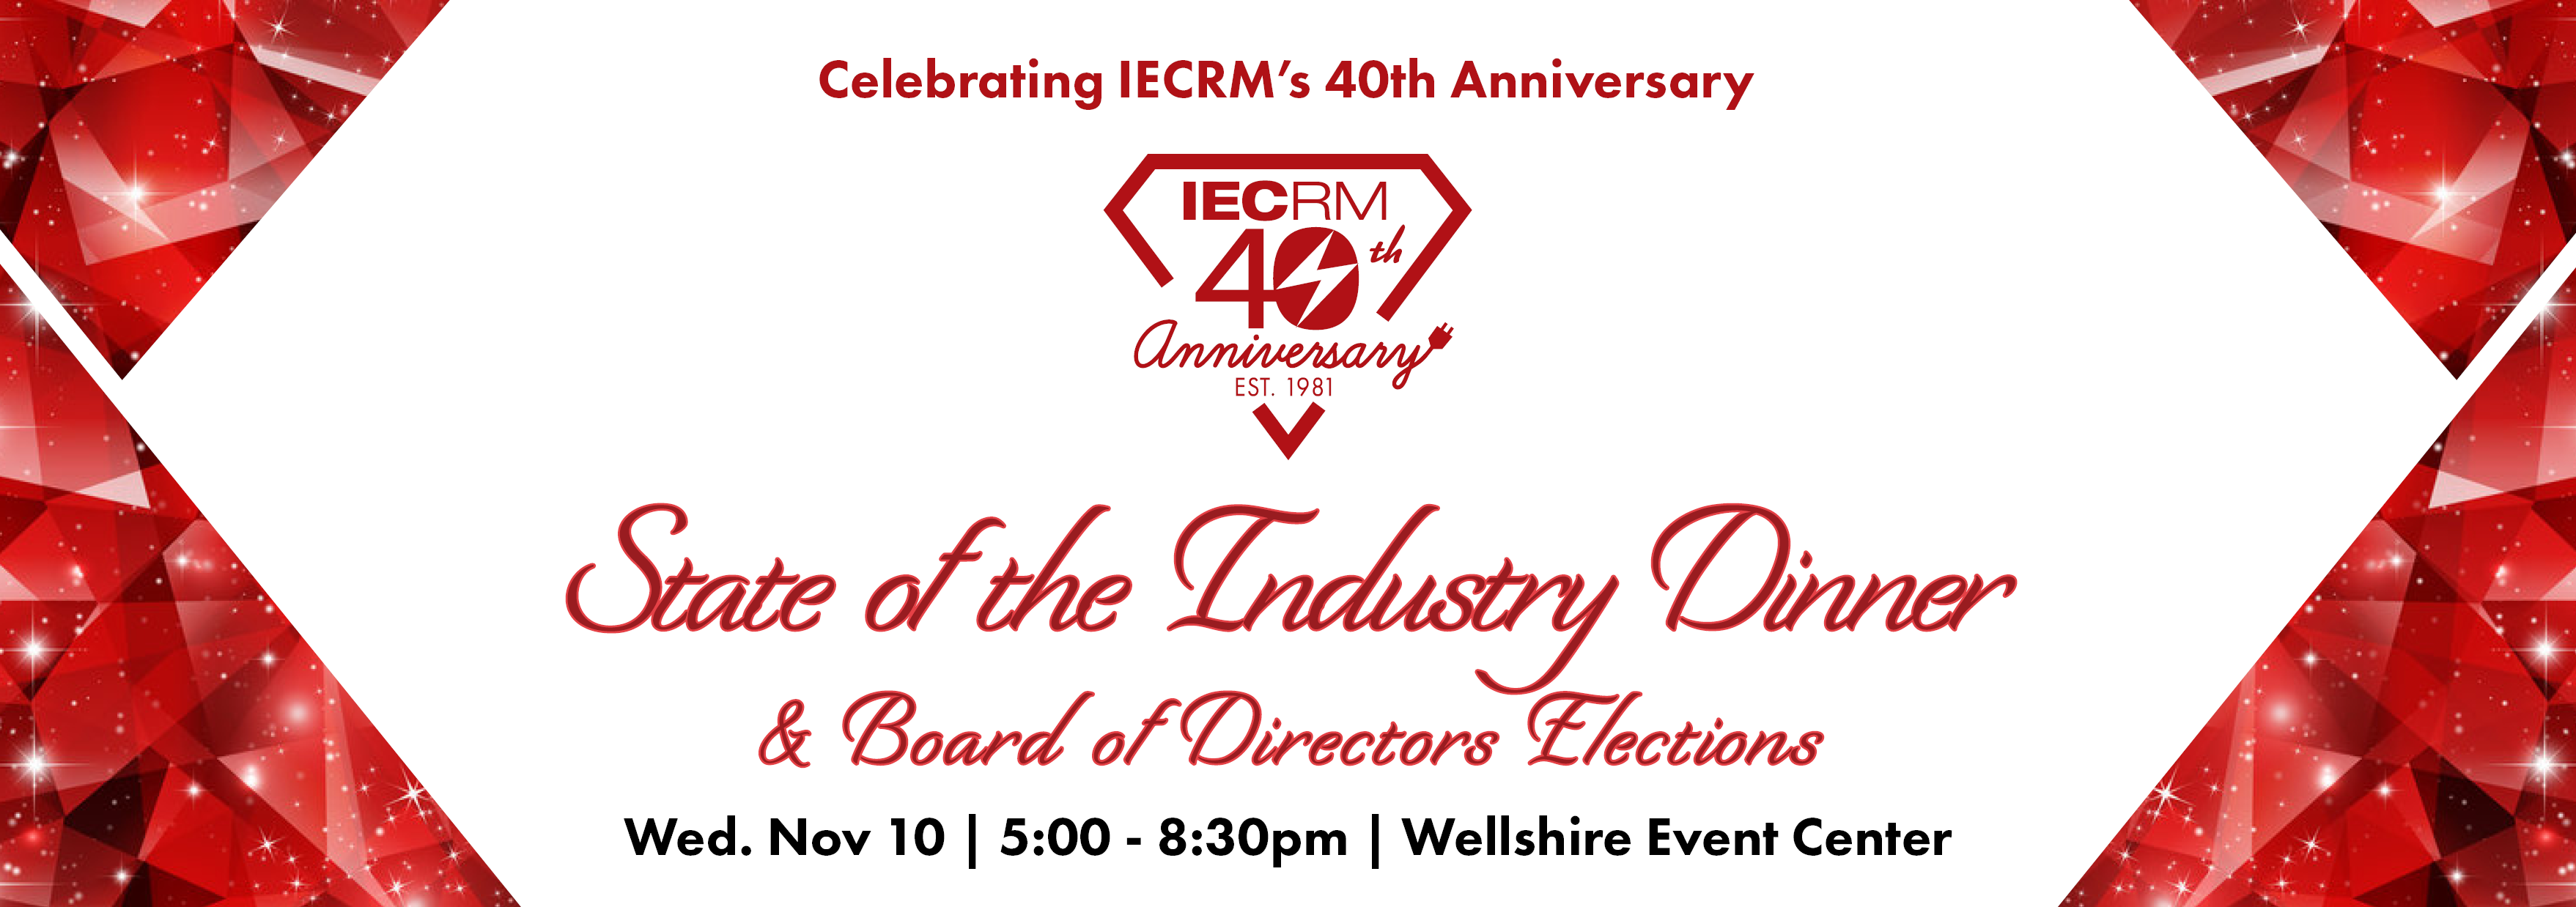 State of the Industry Dinner & Board Elections